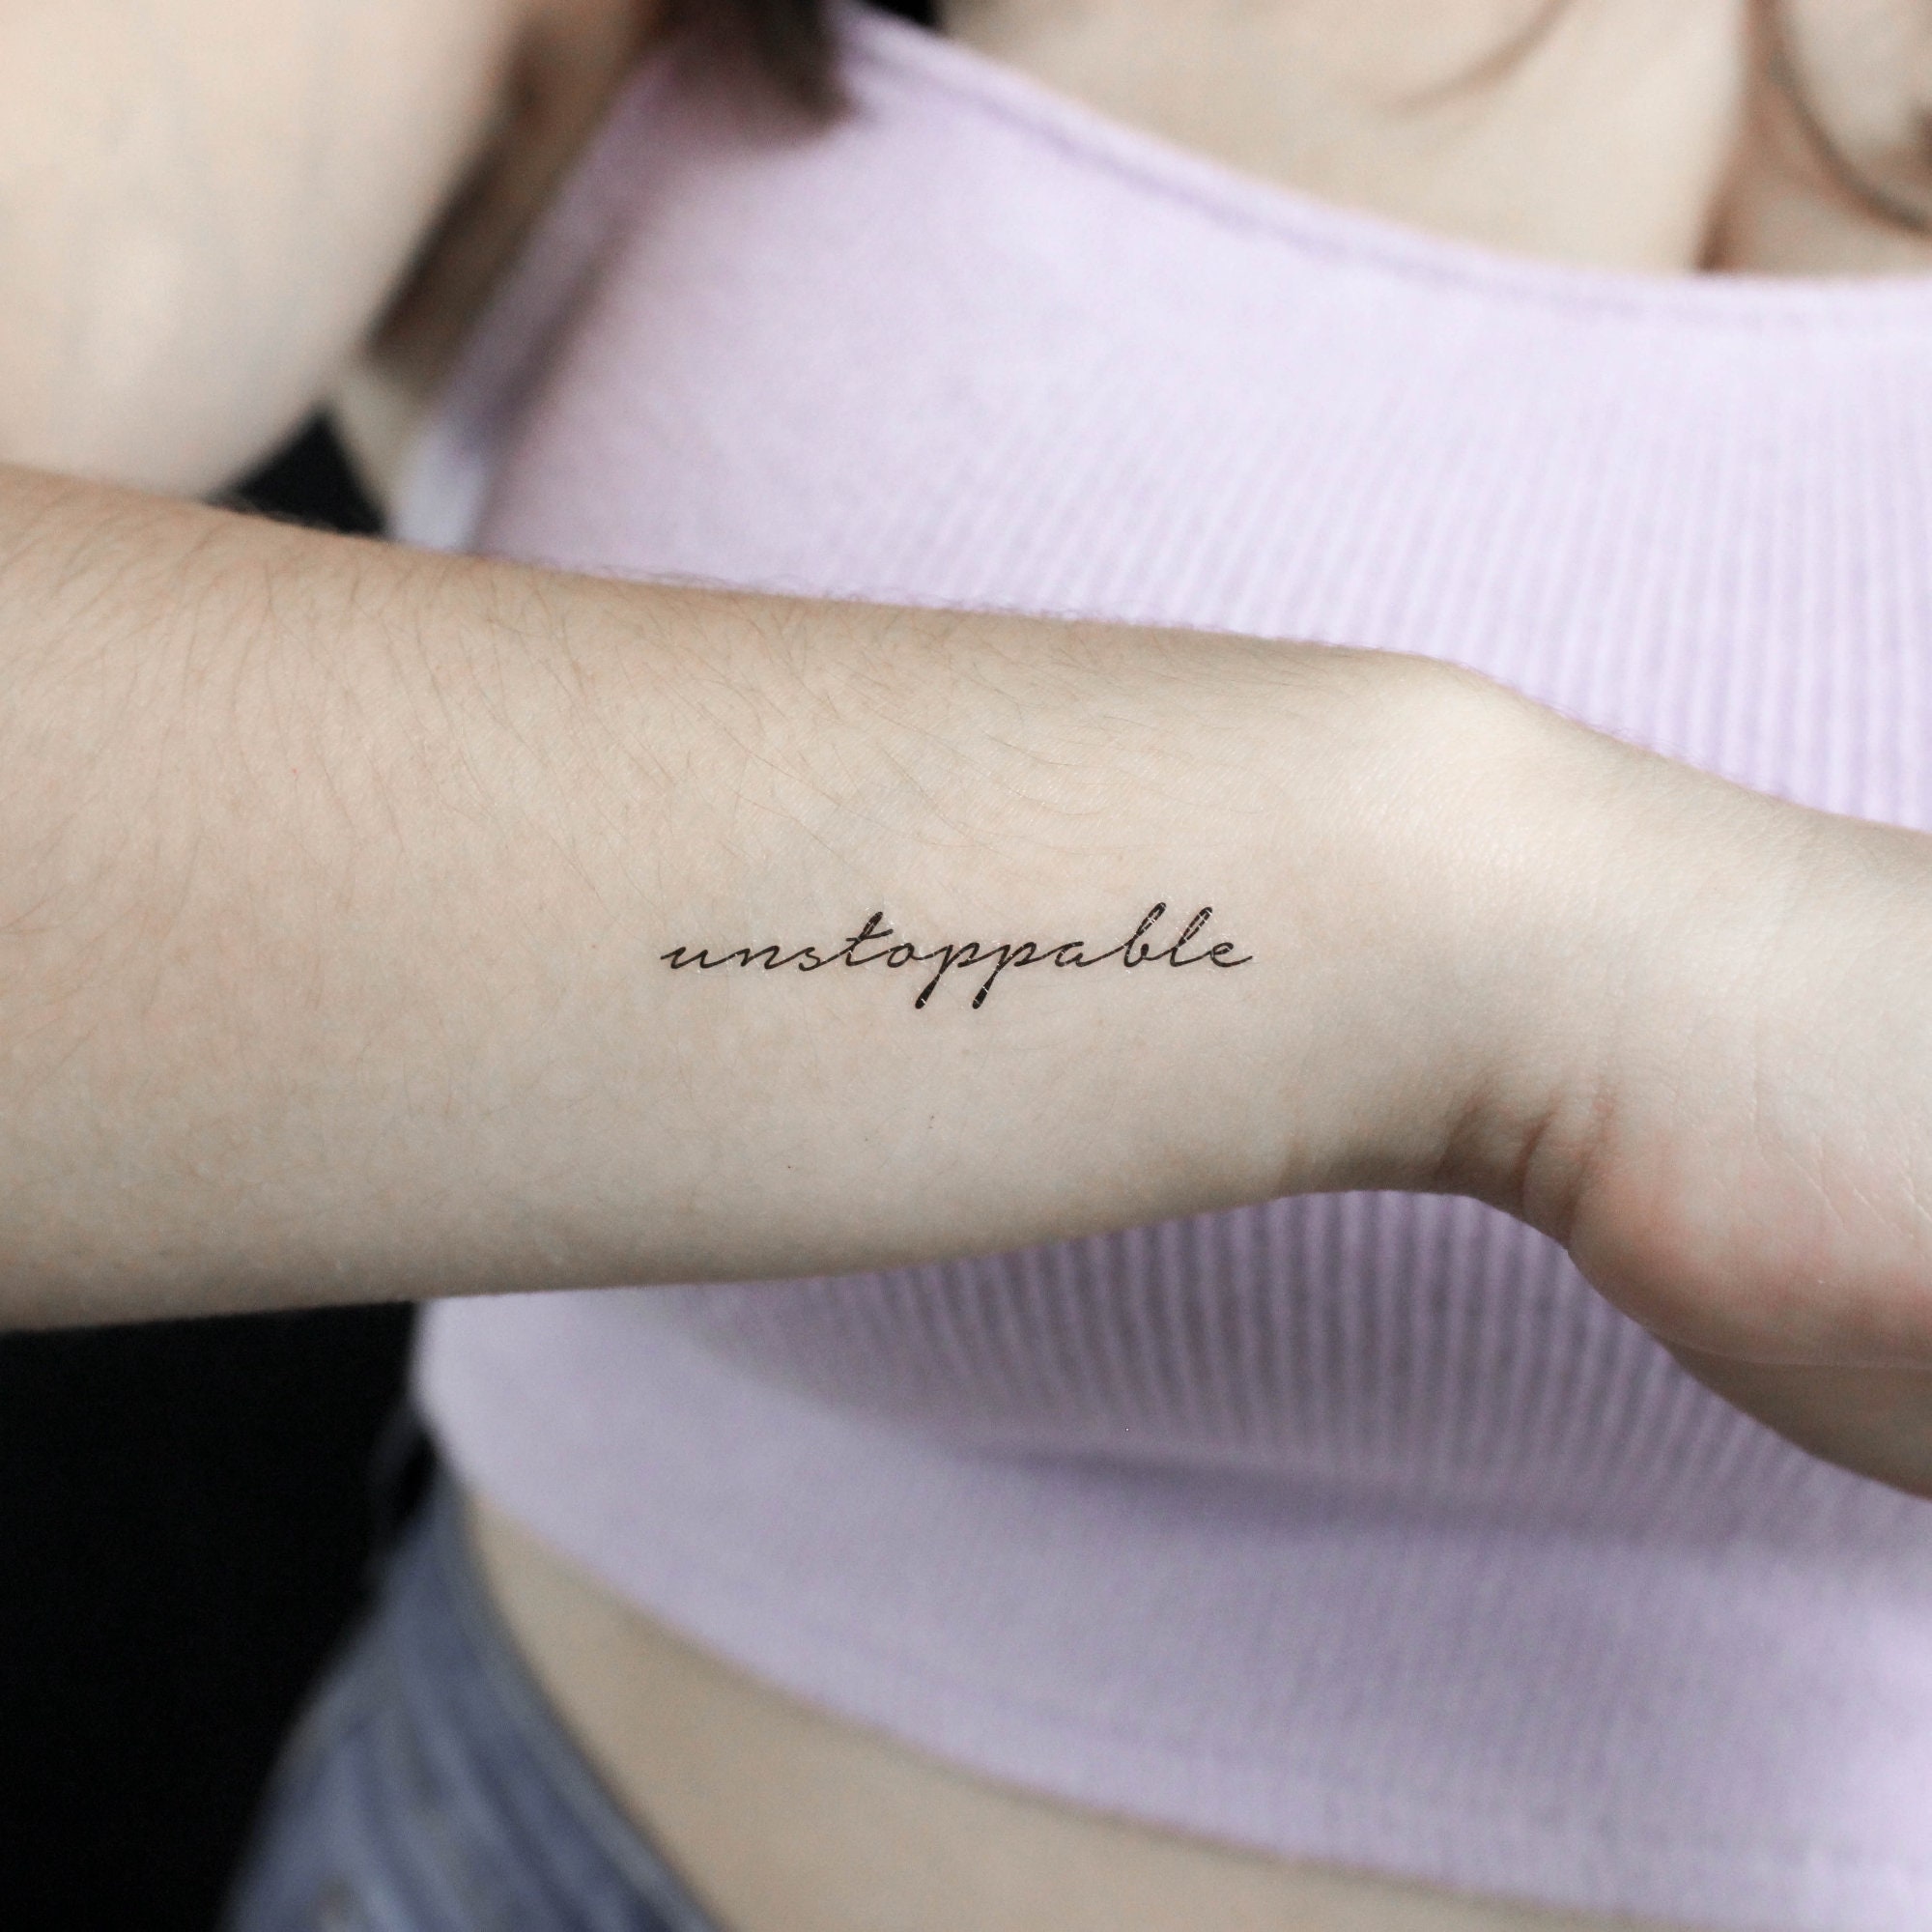 Tattoo tagged with: small, line art, wickynicky, languages, tiny, ifttt,  little, typewriter font, wrist, english, font, english word, word,  unstoppable, fine line | inked-app.com